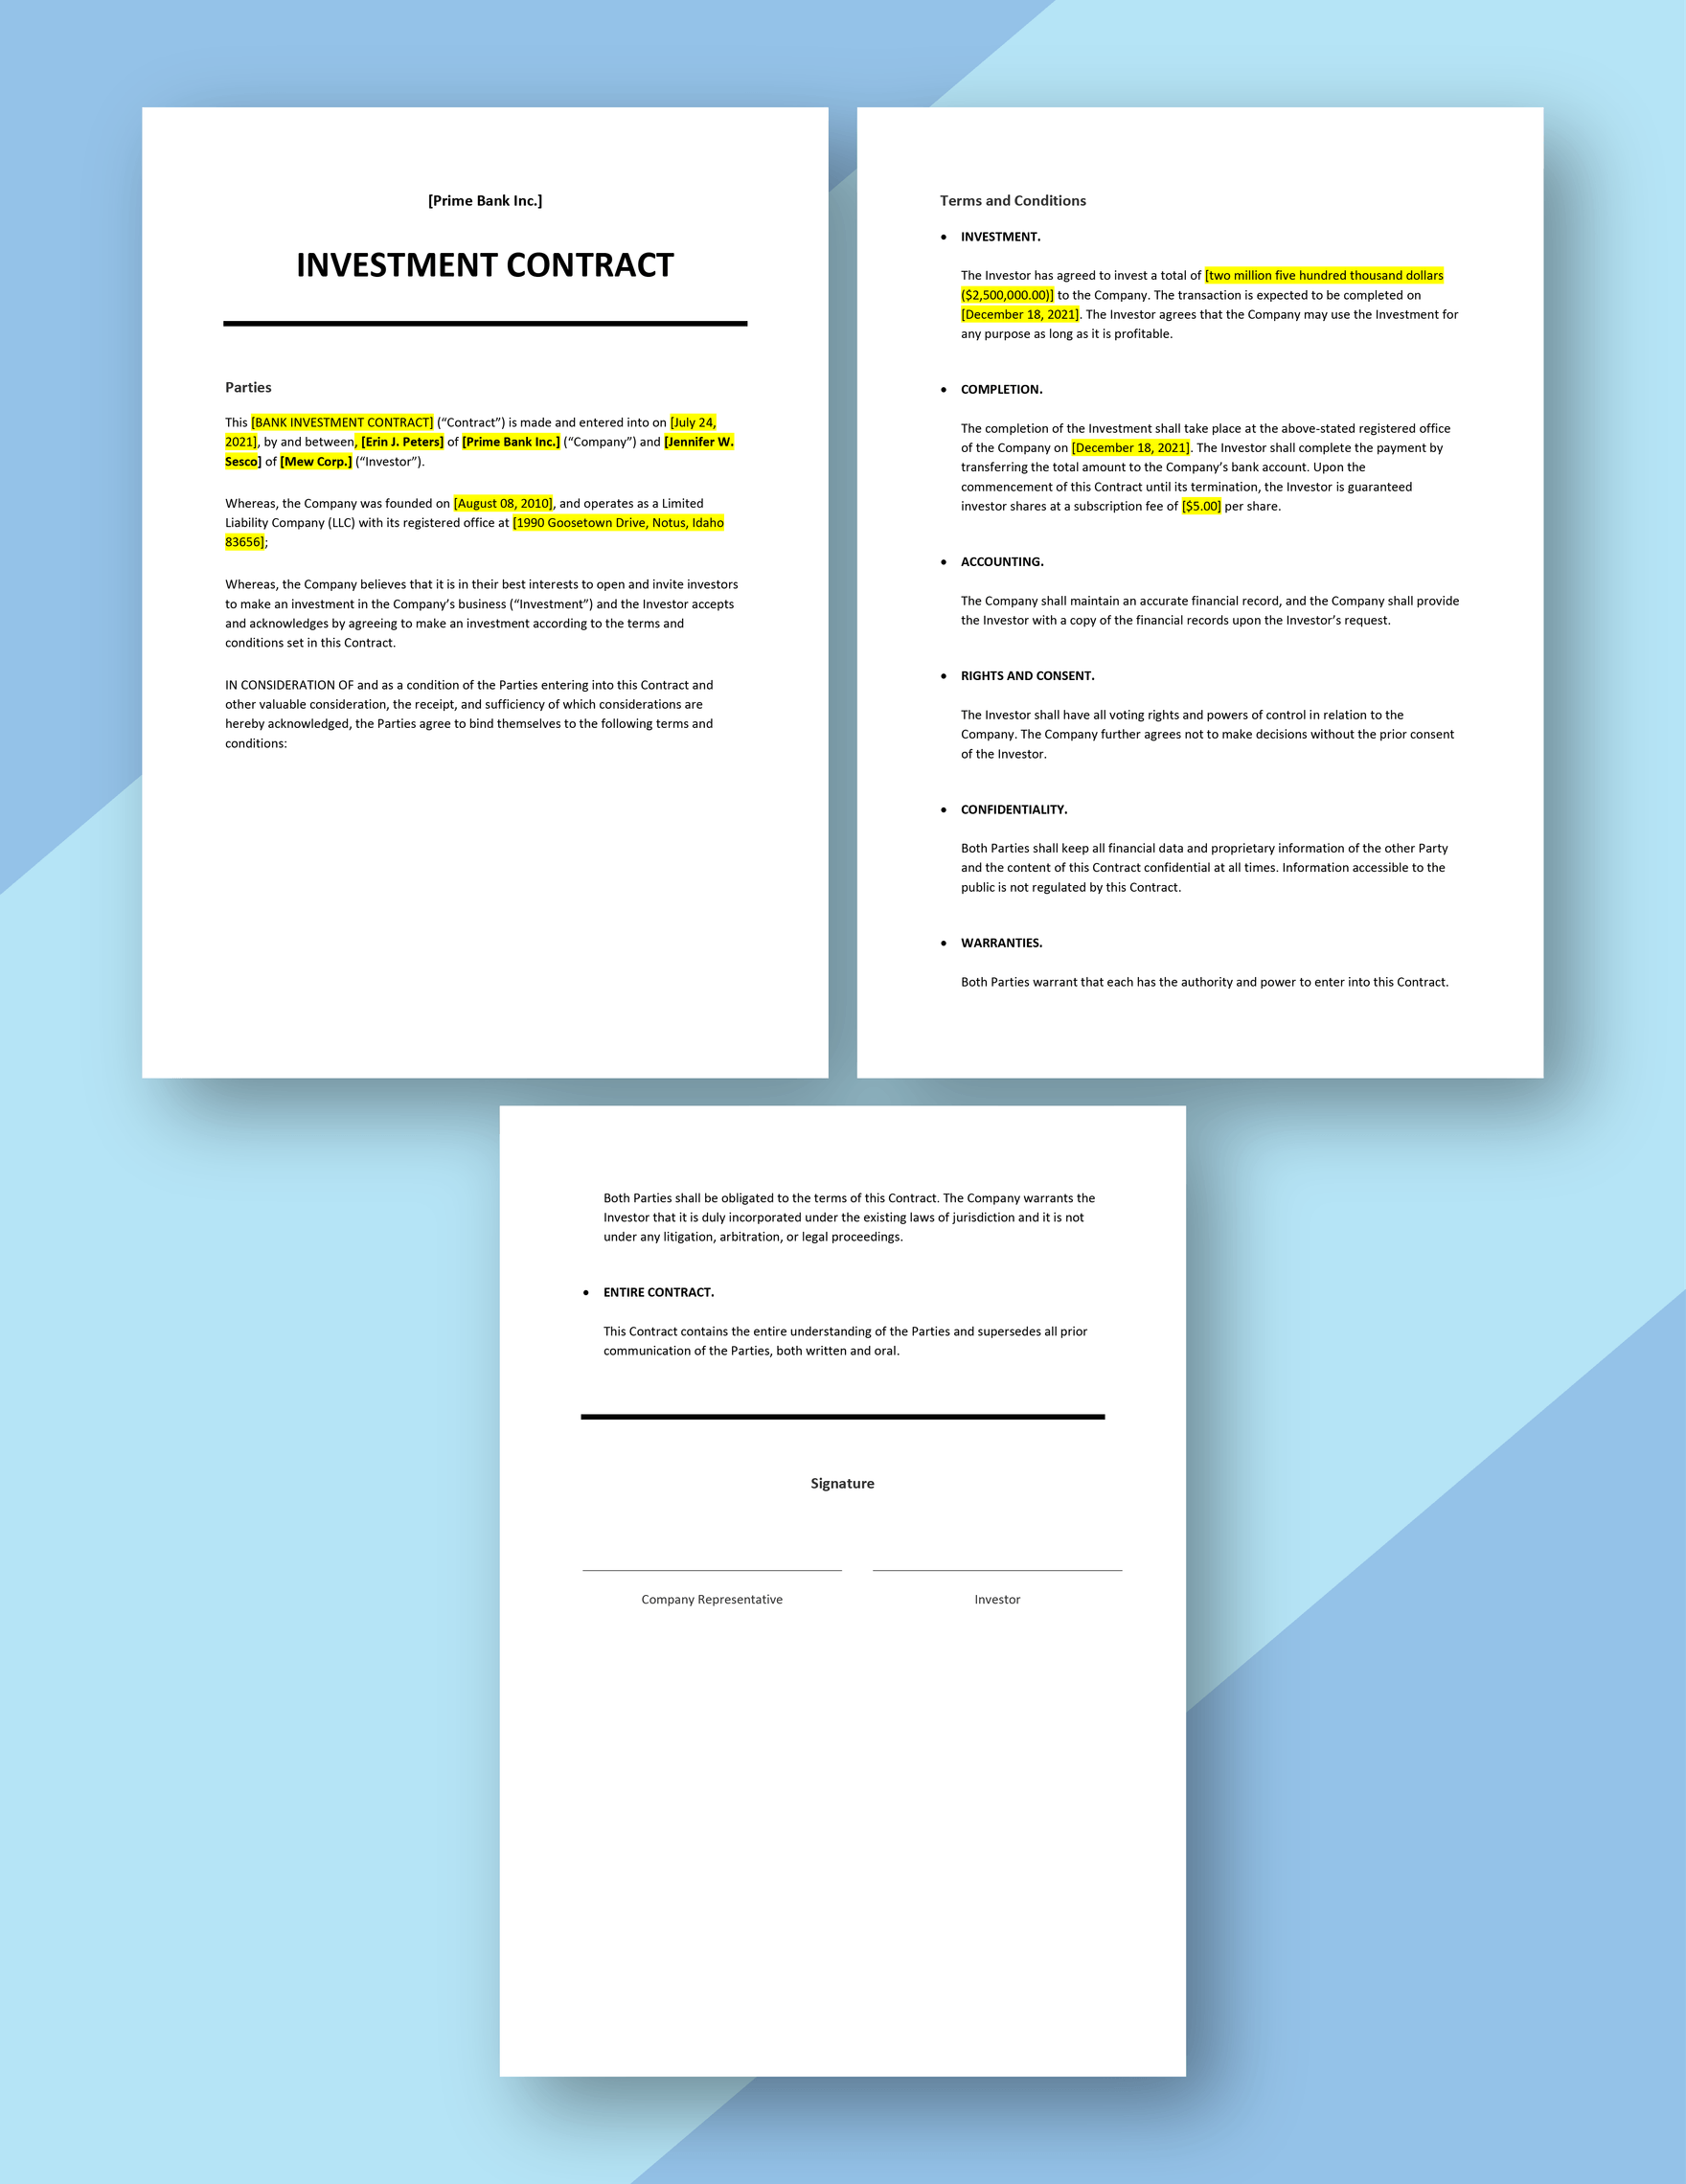 Bank Investment Contract Template